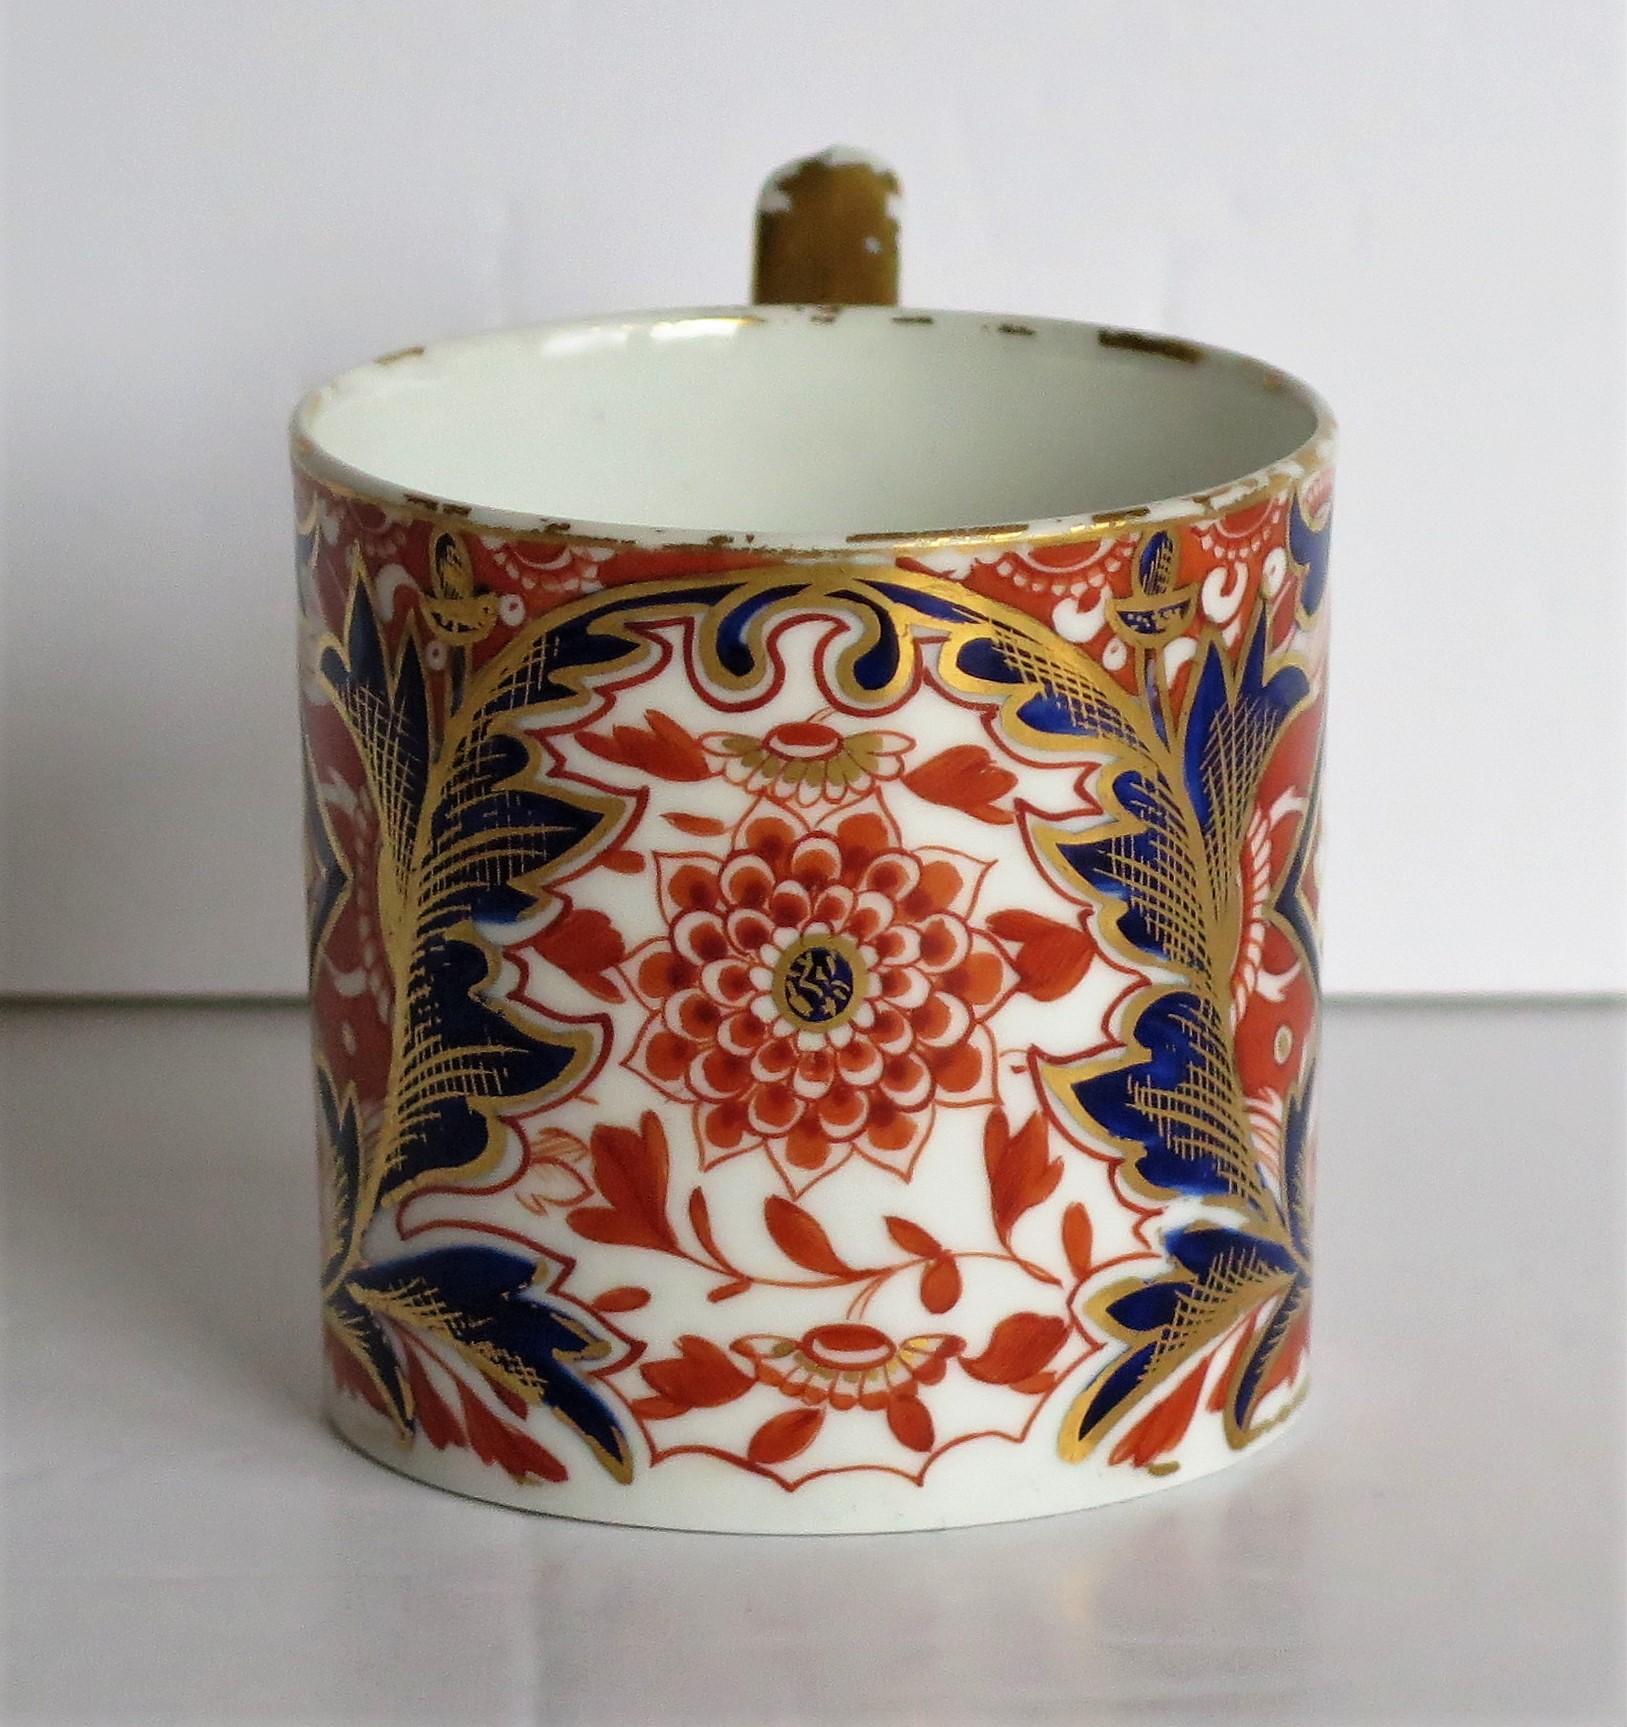 This is a highly collectable, hand painted porcelain coffee can (cup) , made by Derby porcelain Co., England in the George III period, circa 1810.

The coffee can is nominally straight sided and about 2.5 inches square excluding the handle. The